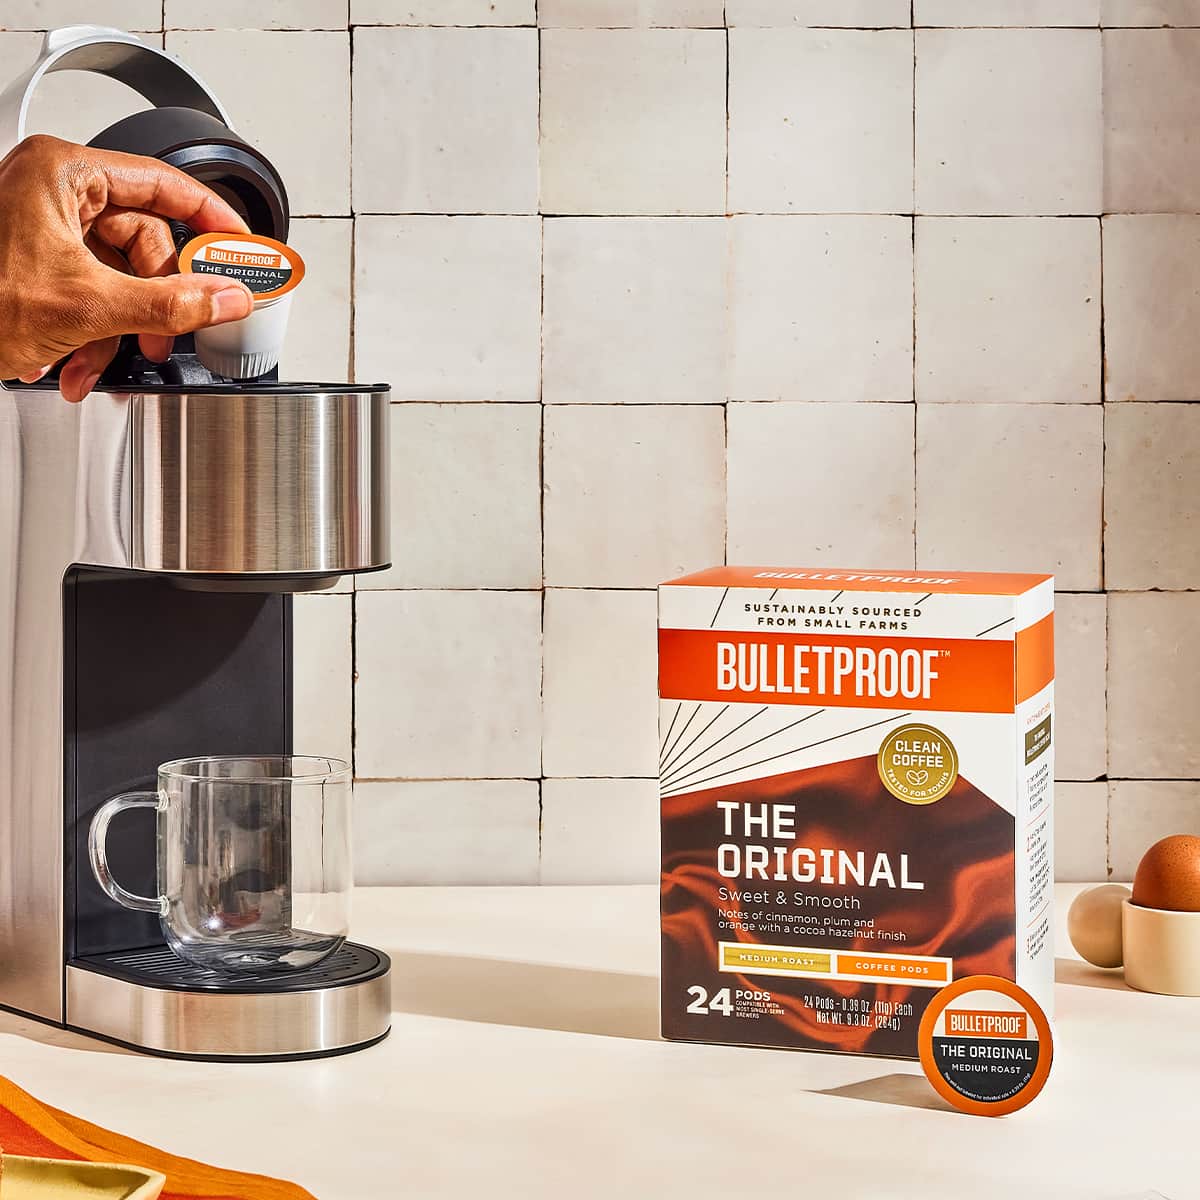 The first Complete Maintenance Kit for Keurig K-Cup coffee brewers